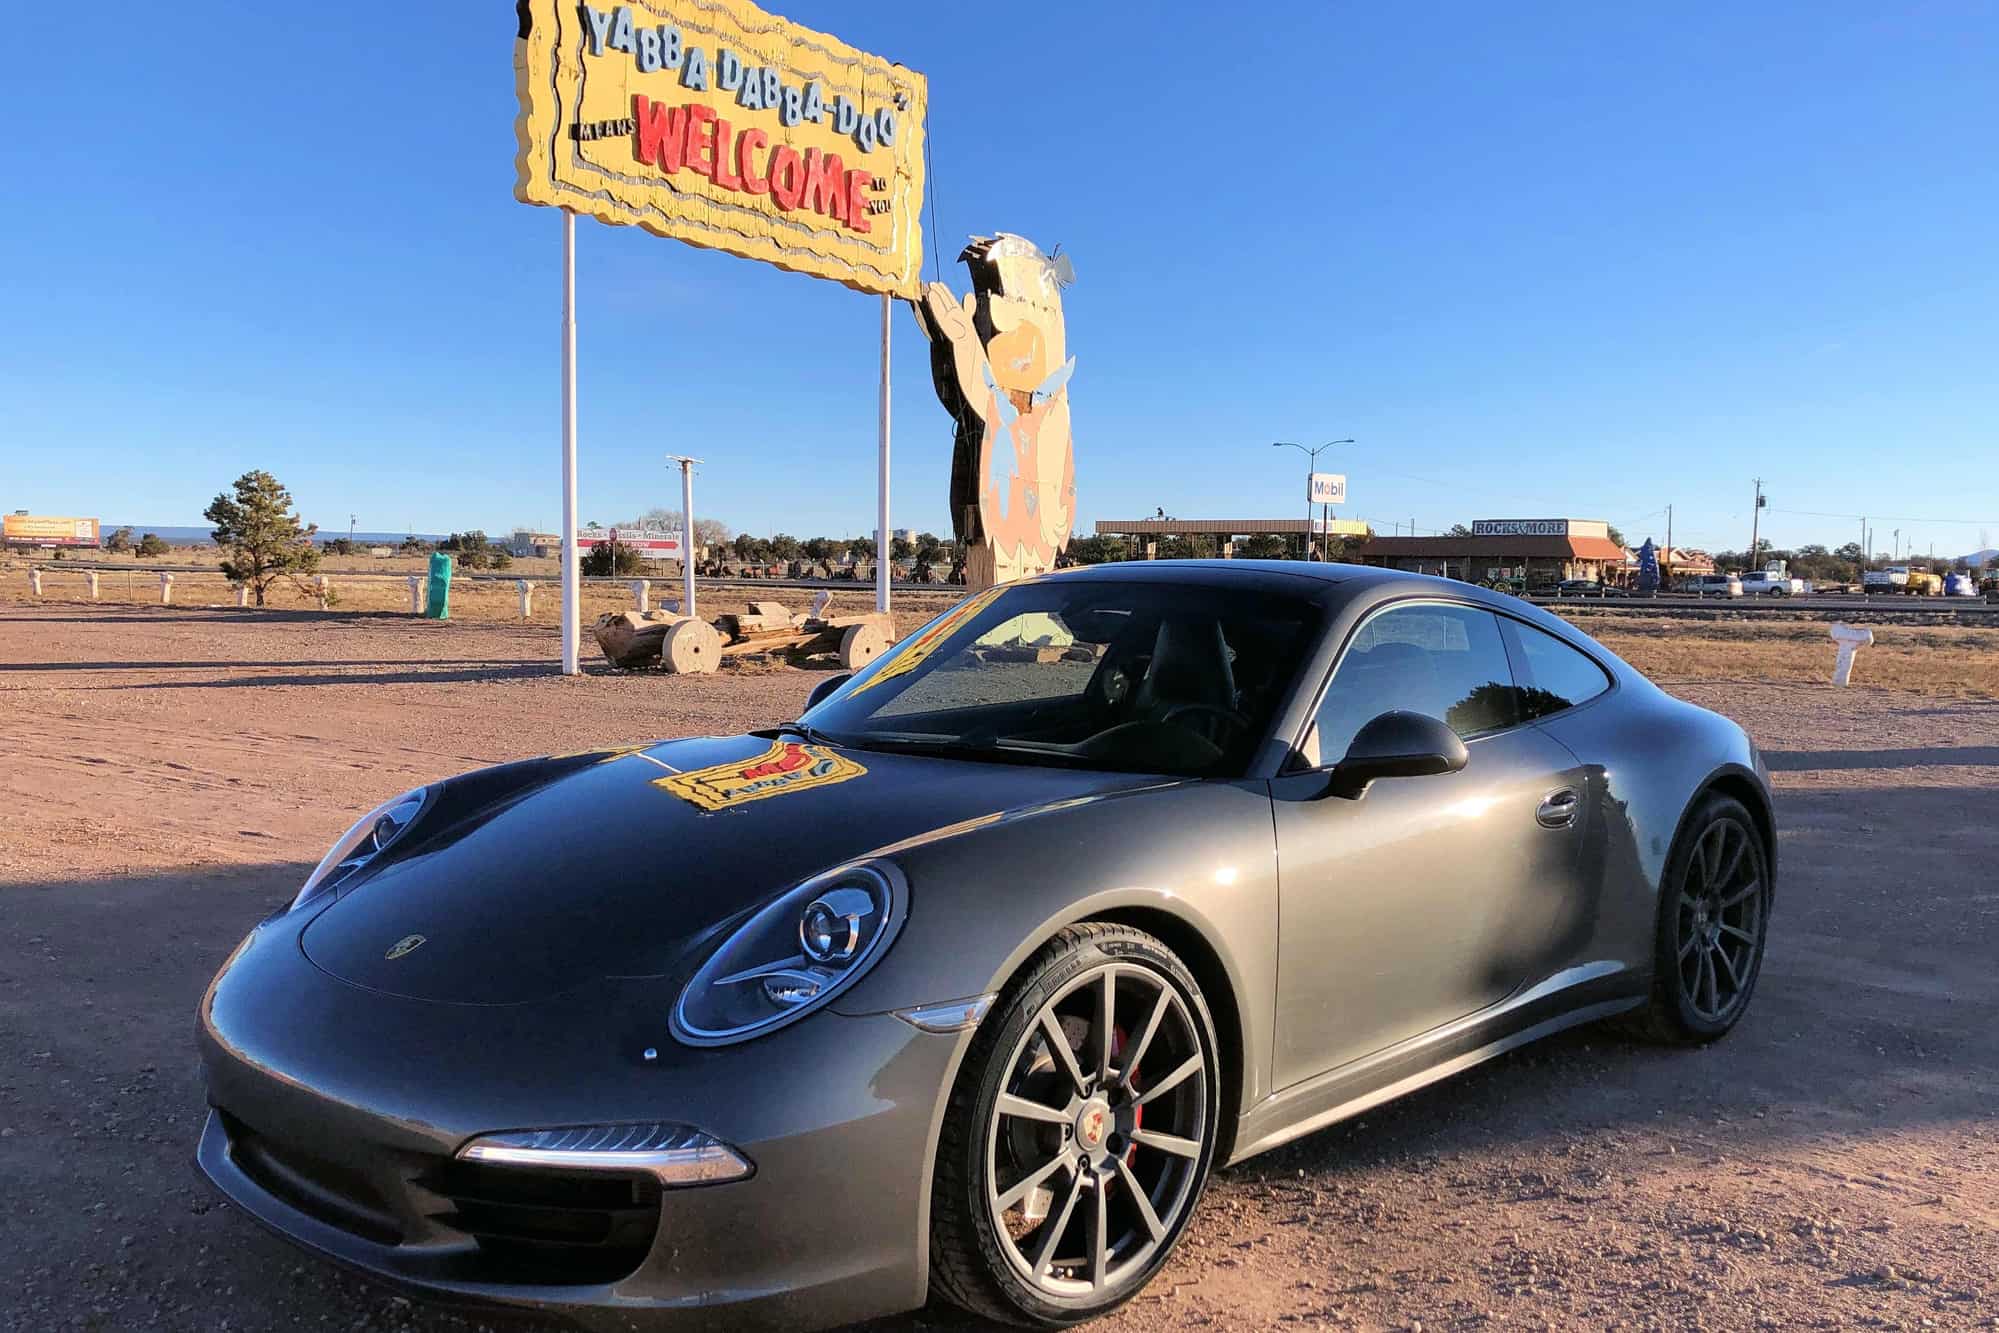 2013 Porsche 911 - 2013 Porsche 911 C4S - Rare Manual, Sport Exhaust, Glass Roof - loaded, mint - Used - VIN WP0AB2A91DS121427 - 47,863 Miles - 6 cyl - 4WD - Manual - Coupe - Gray - East Setauket, NY 11790, United States